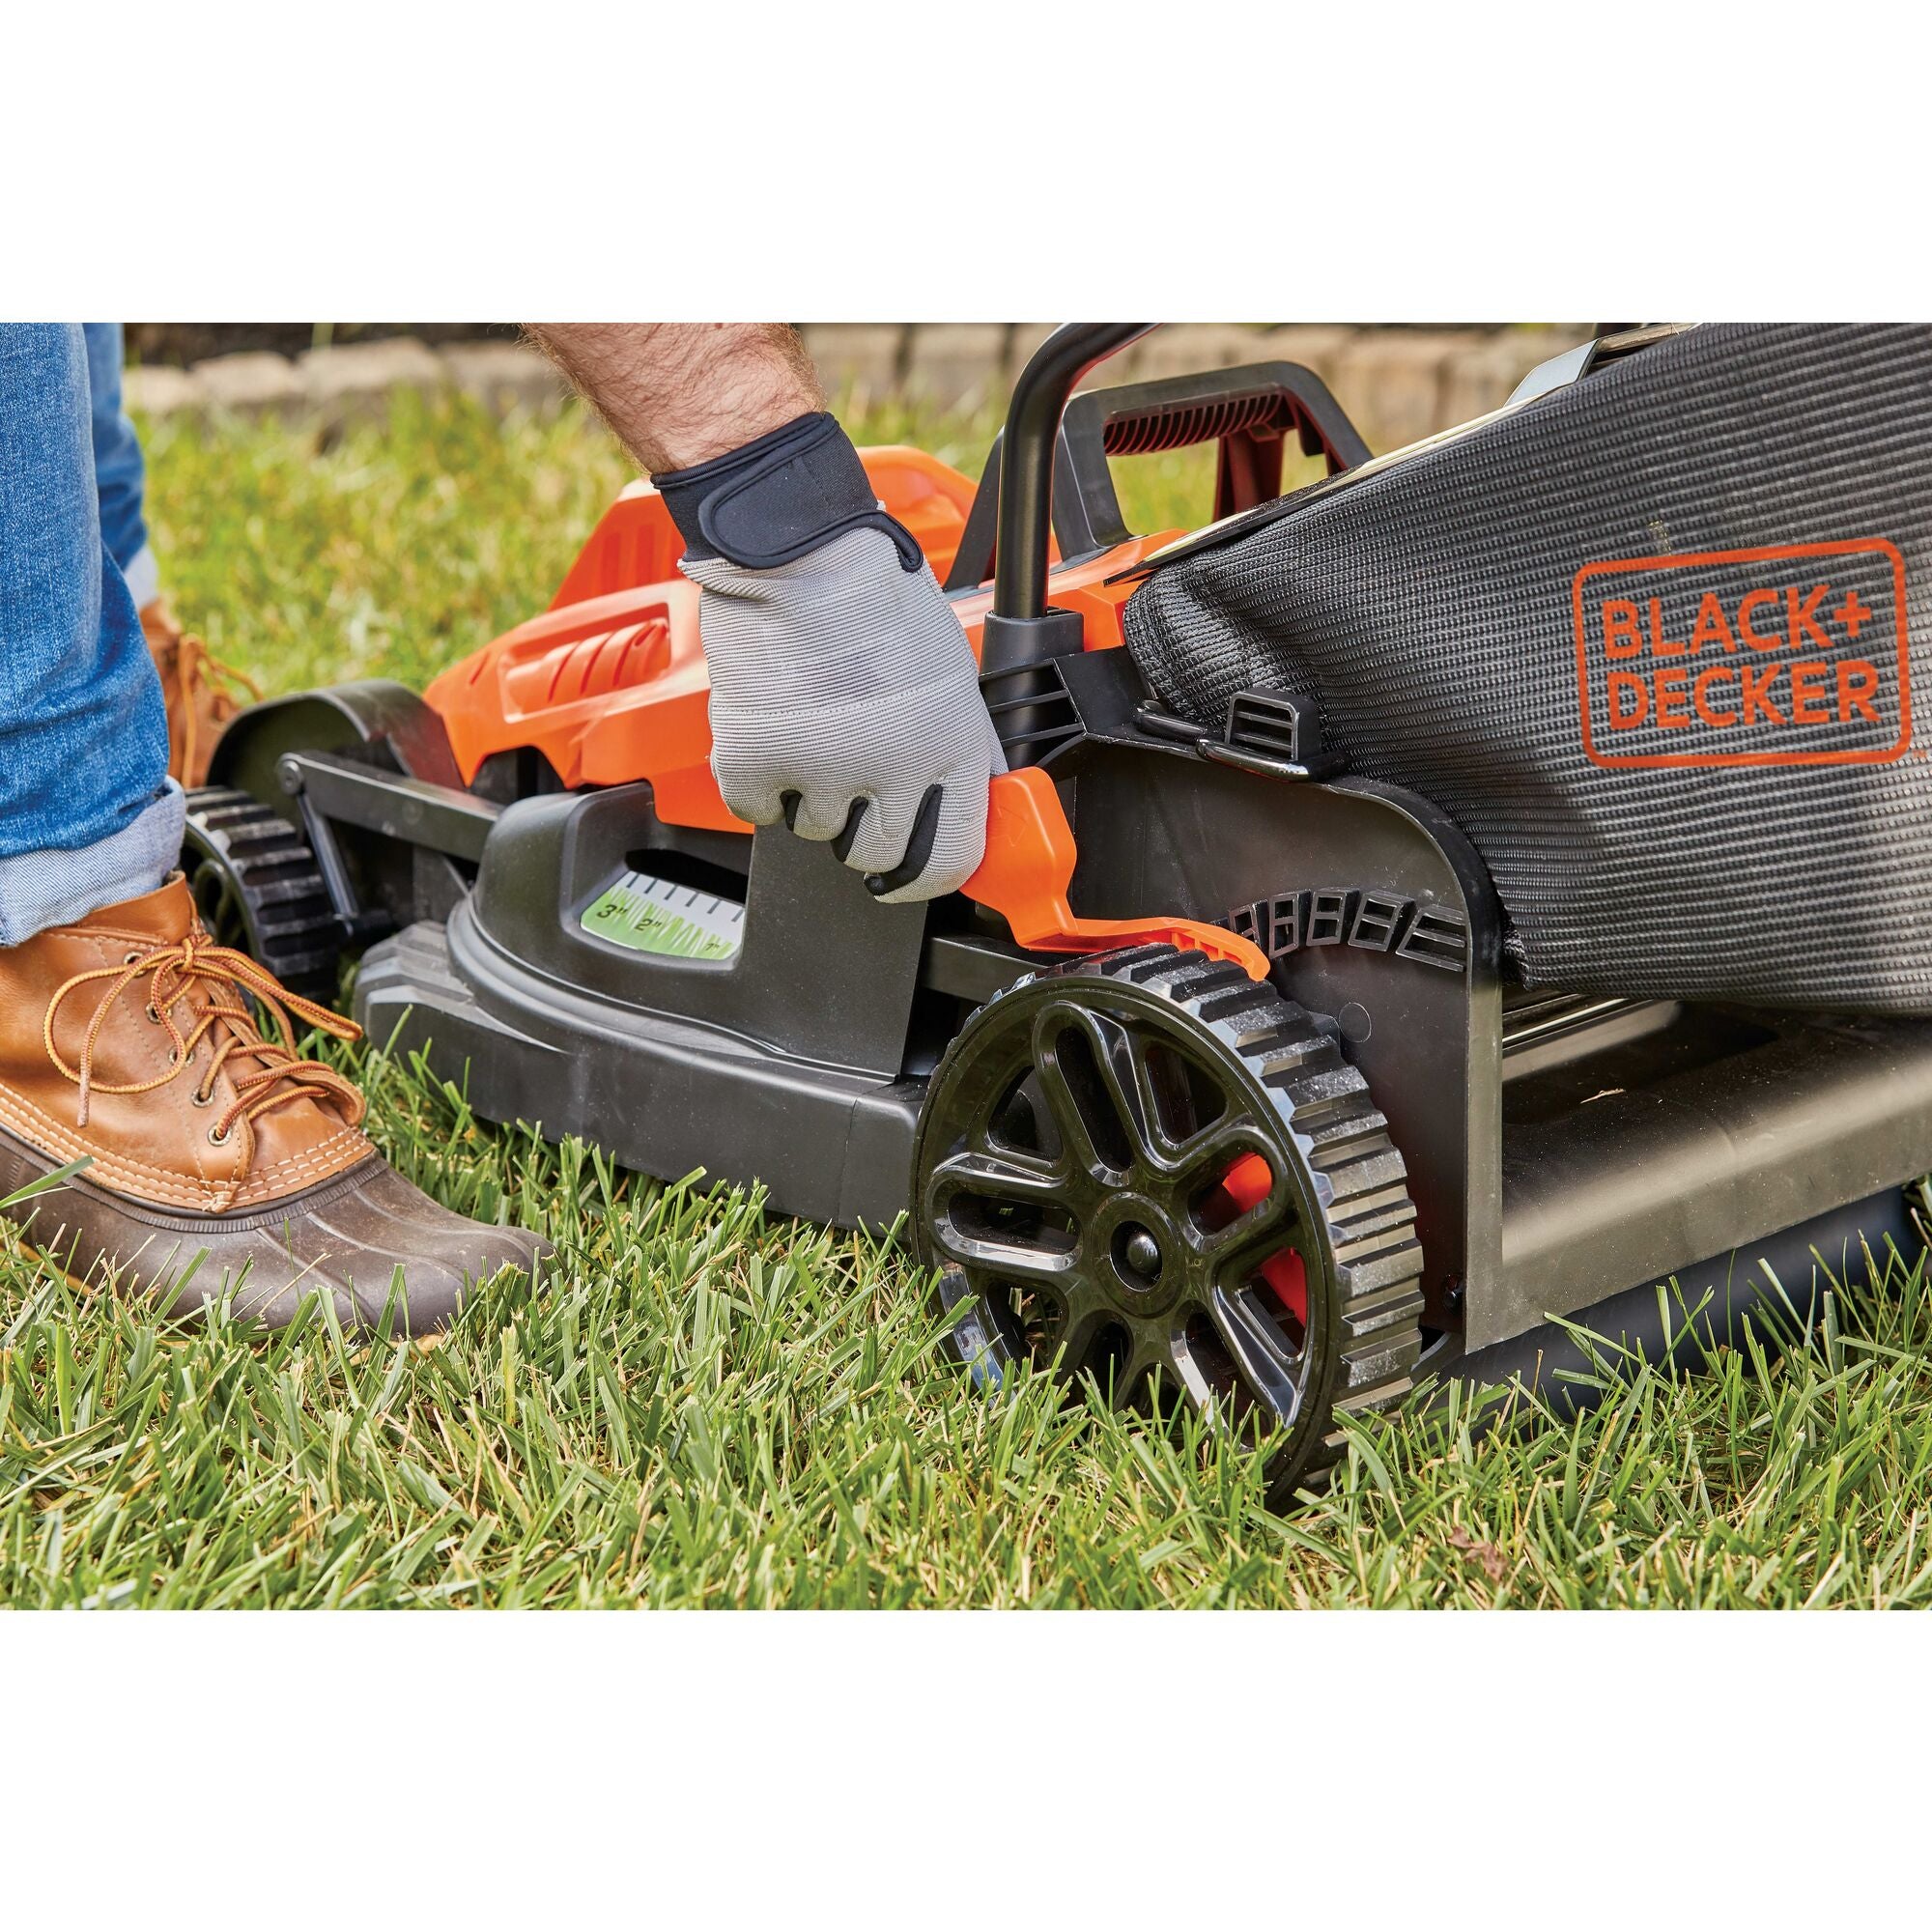 Comfort grip handle feature of 10 Amp 15 inch electric lawn mower.